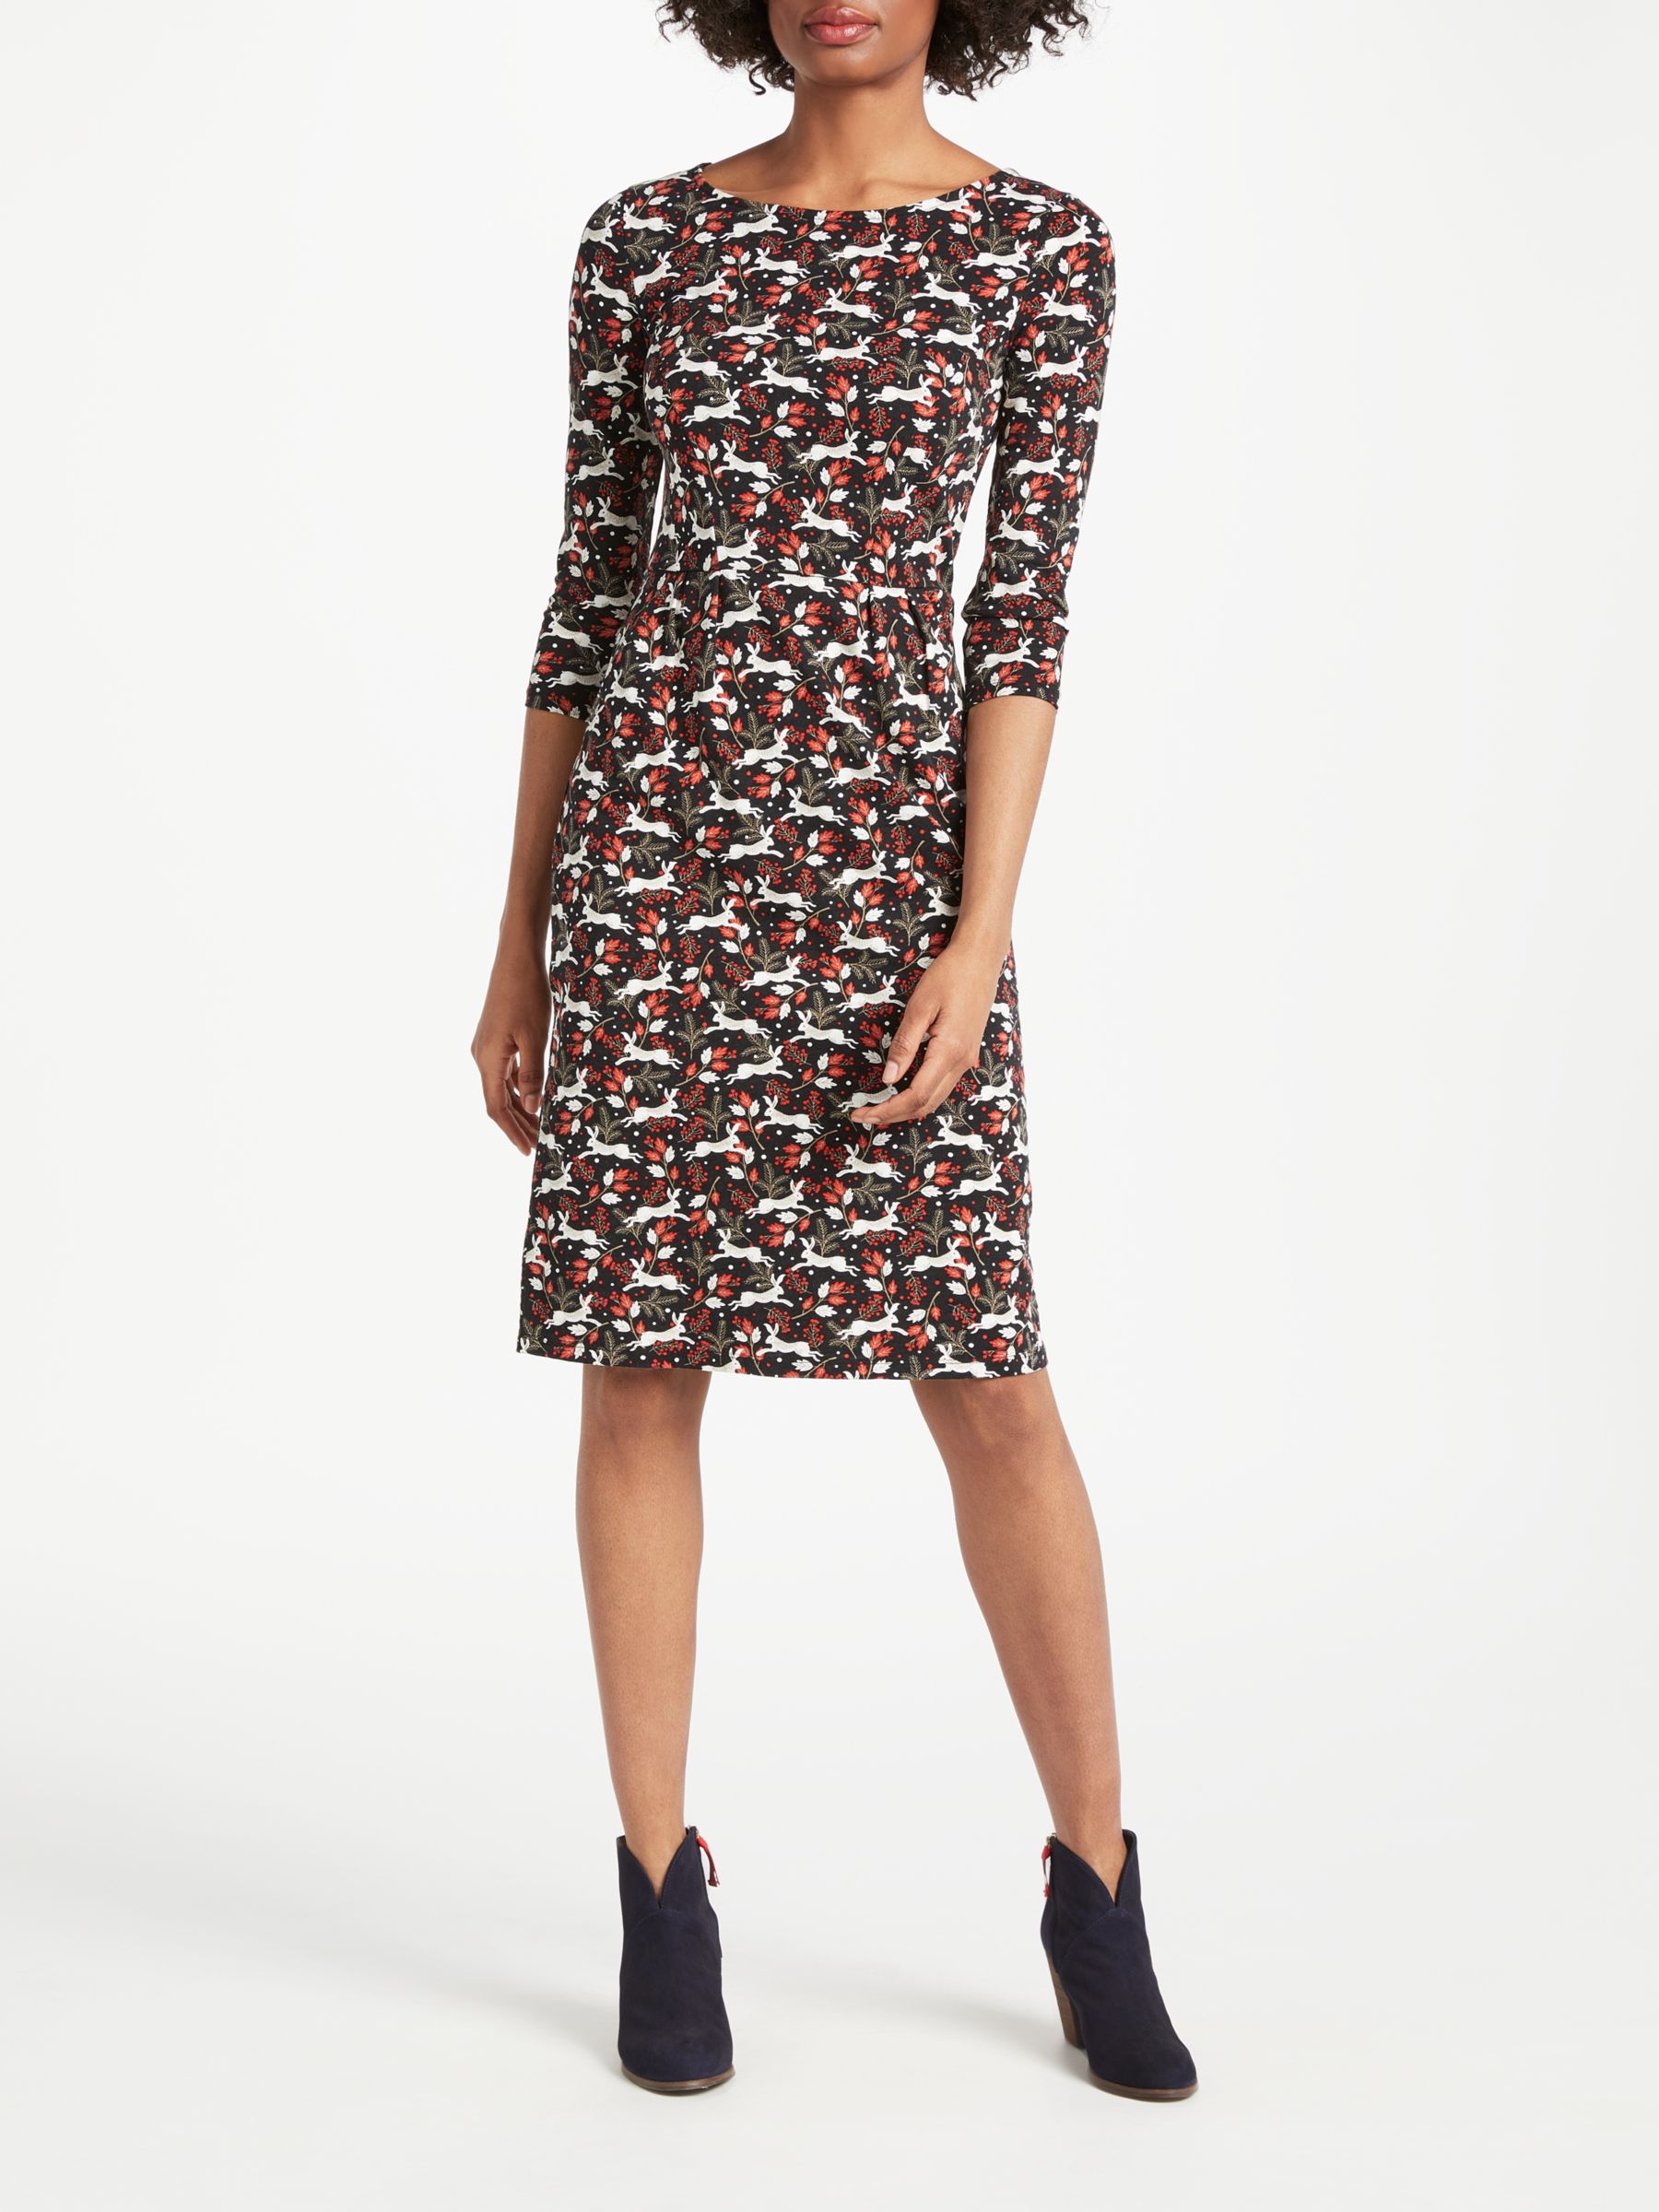 Boden Penny Jersey Dress at John Lewis 